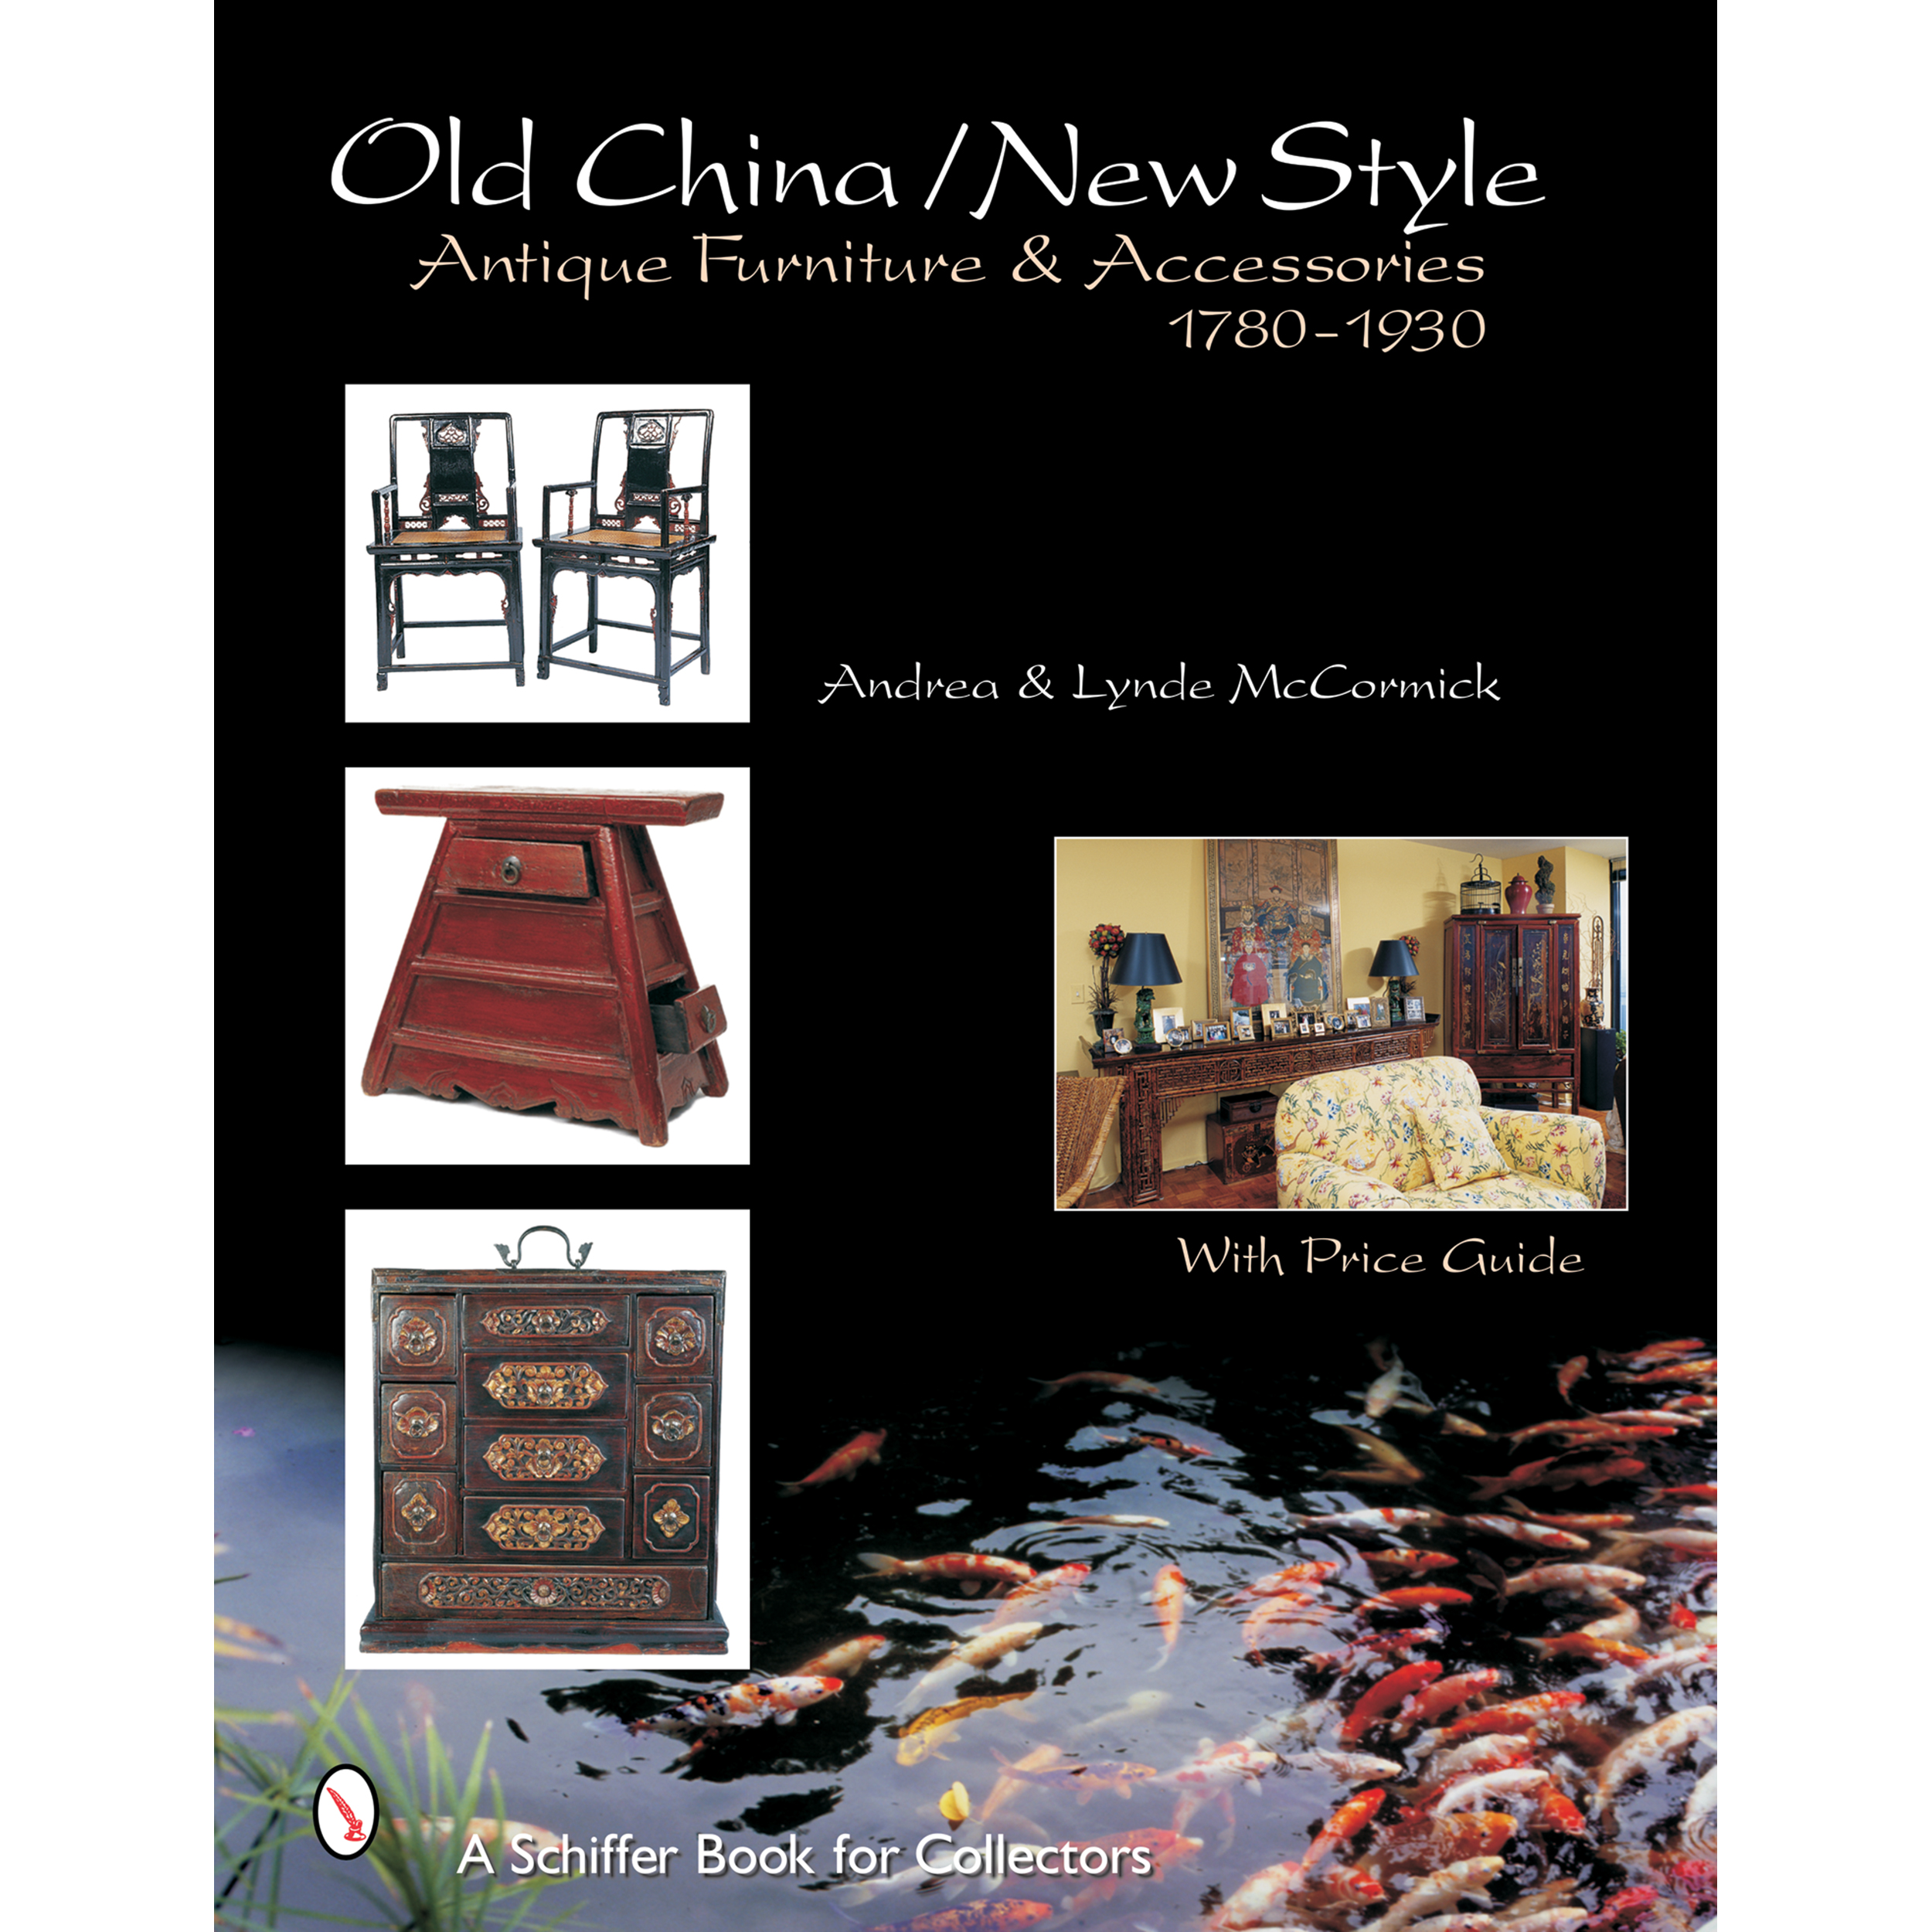 Old China / New Style: Antique Furniture And Accessories, 1780-1930